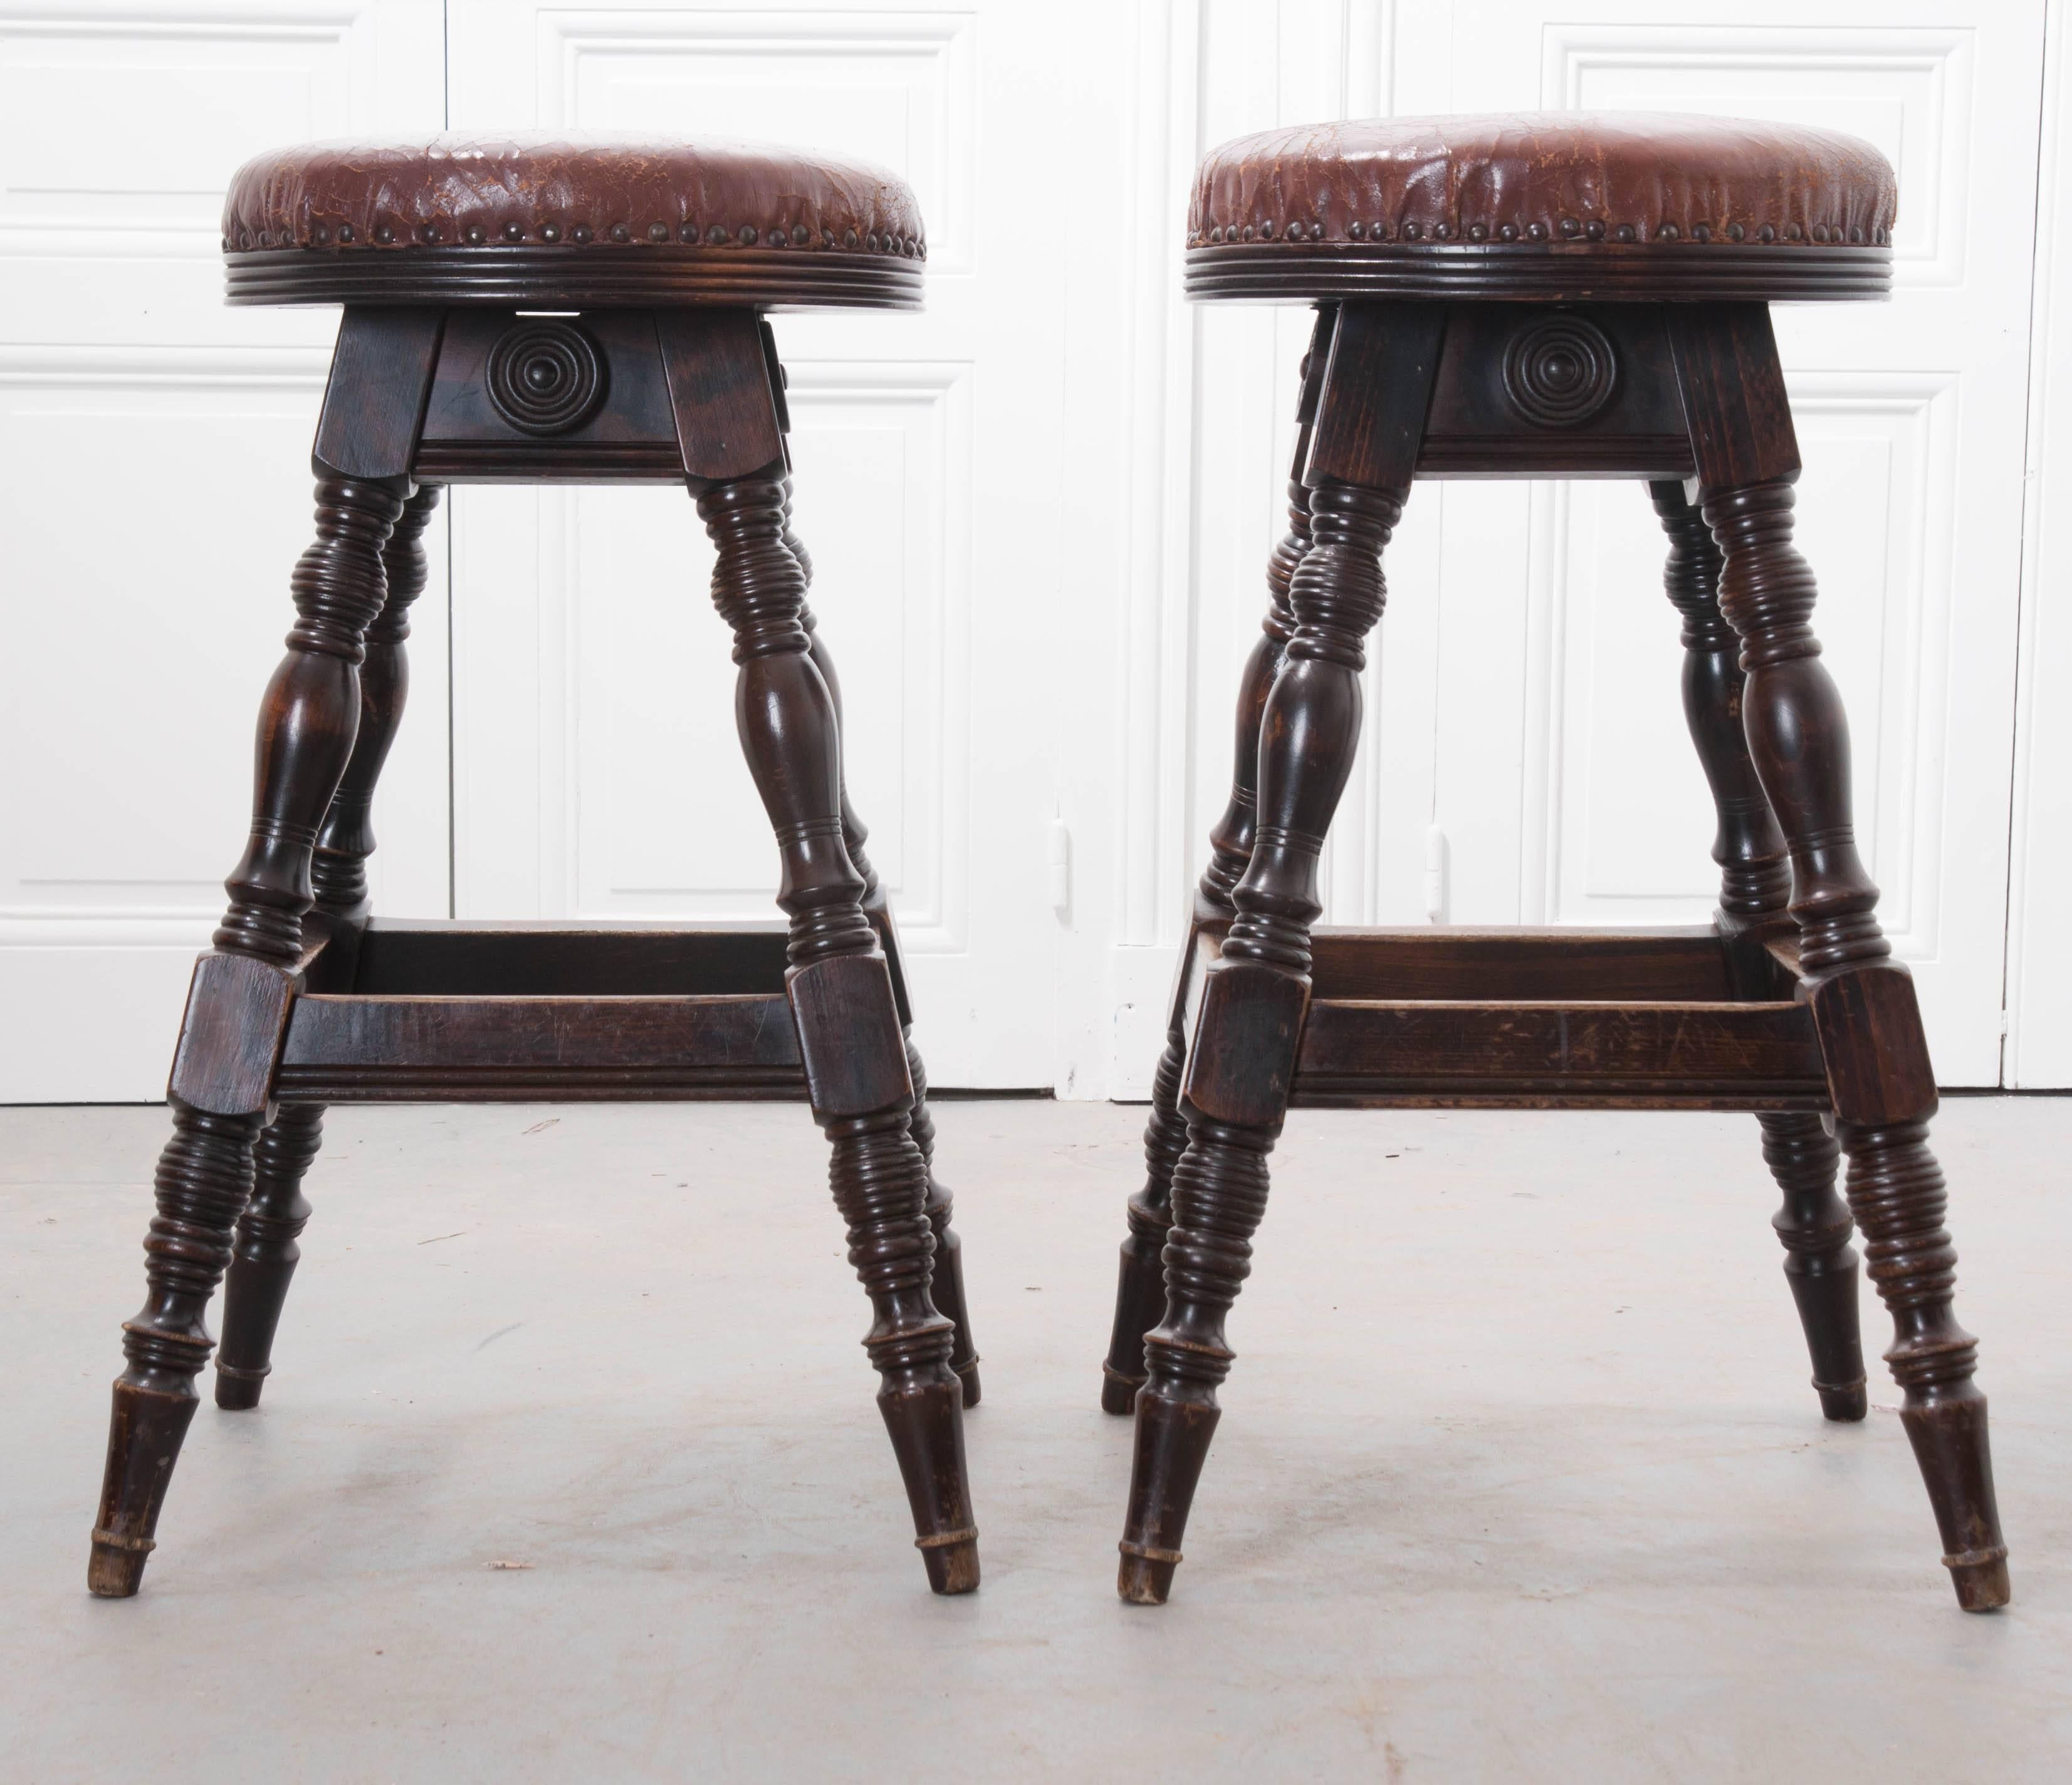 A handsome pair of antique oak pub stools with leather seats from the end of the 19th century, England. These stools have worn, cordovan leather seats that are secured to their frames using bronzed nailheads. The seats are fixed and do not swivel.